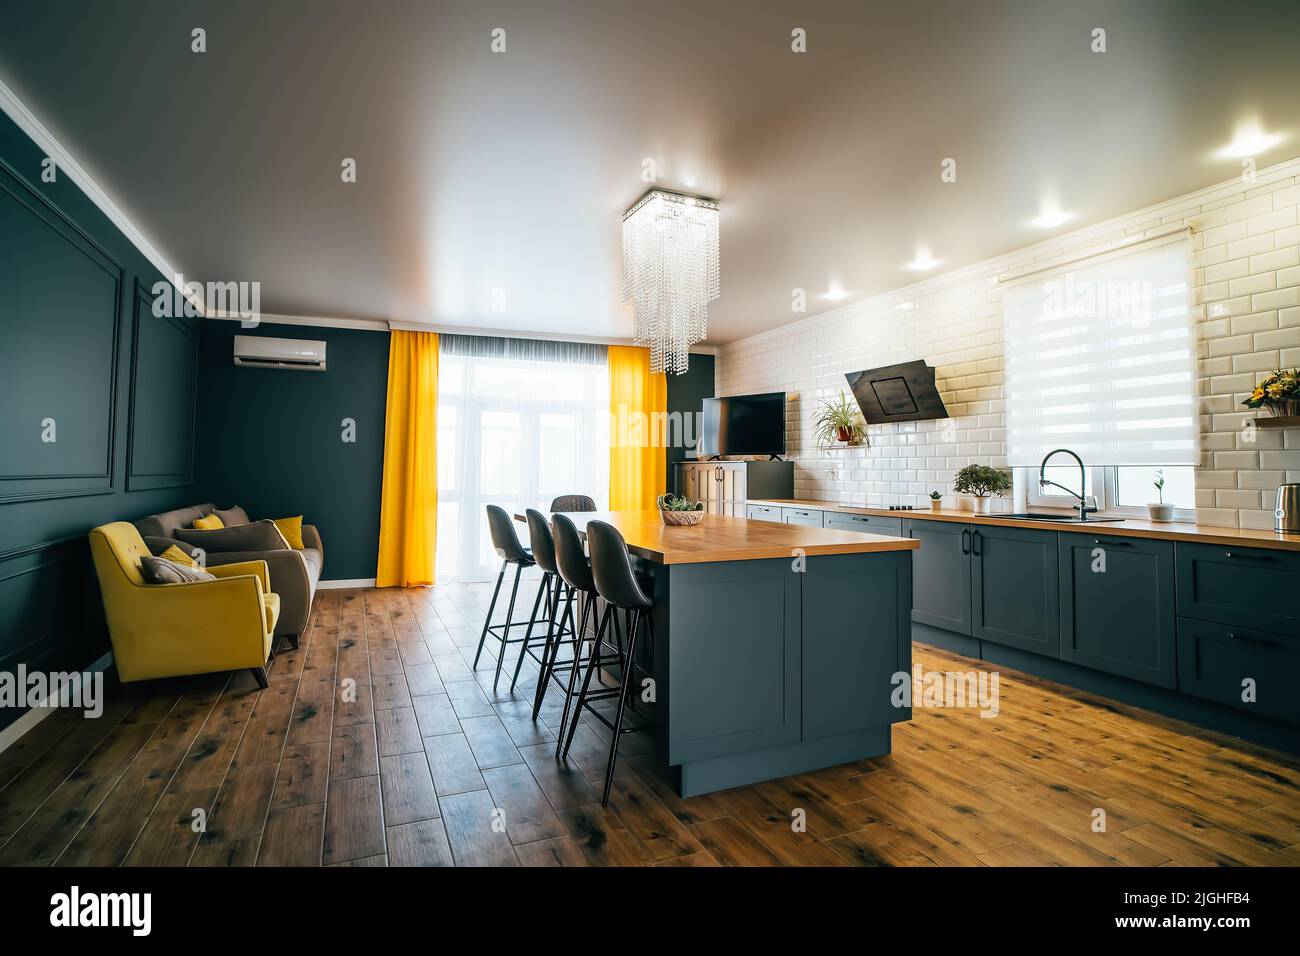 Interior of modern kitchen in blue with yellow accents and wooden floor with large table in middle of room, cooking area and sofa for relaxing. Stock Photo